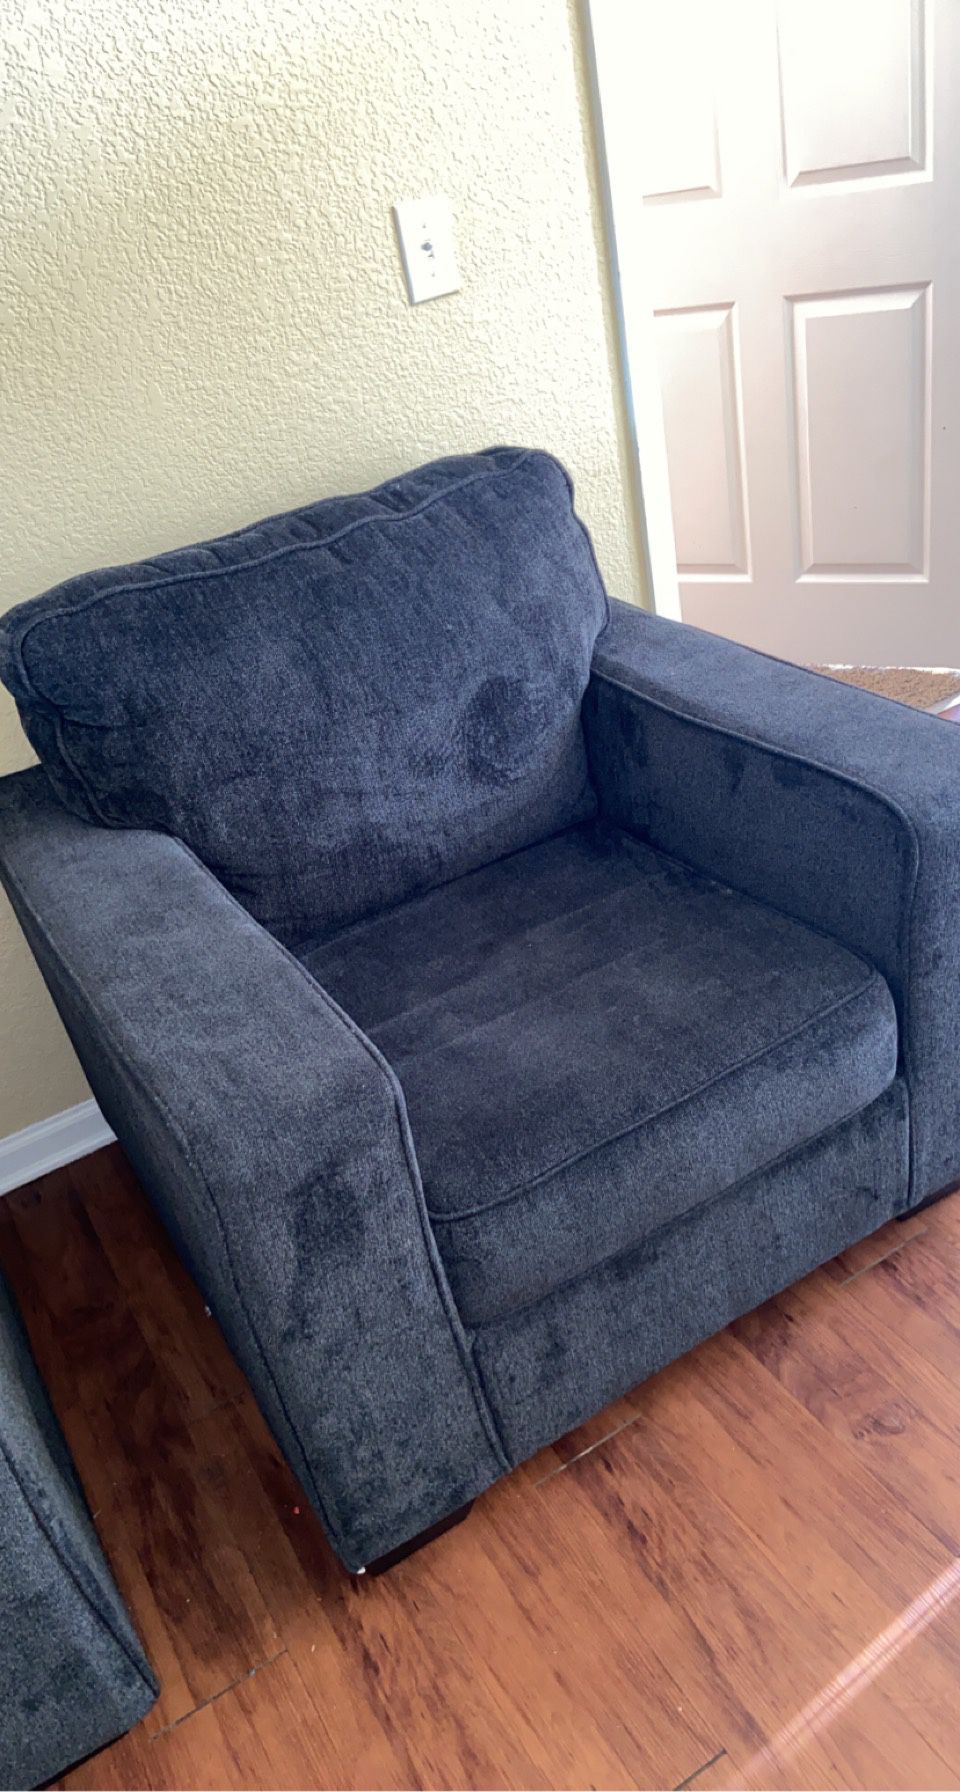 Couch Set $275 PICK UP TOMORROW 